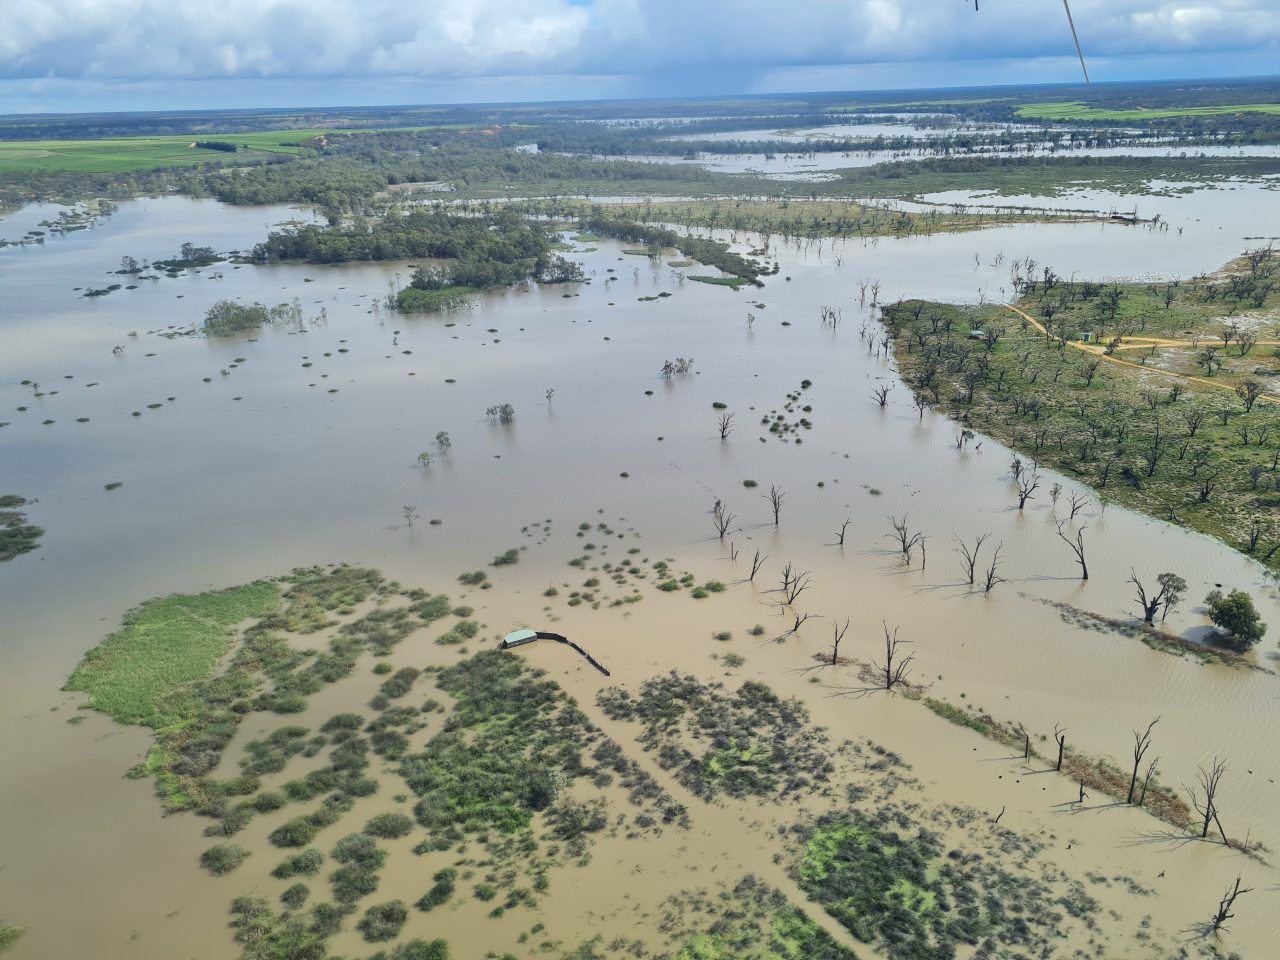 Aerial photo of flooded wetland with brown water spreading across the floodplain. The areas above the water line are green. There are areas with dead trees within and outside the water line.